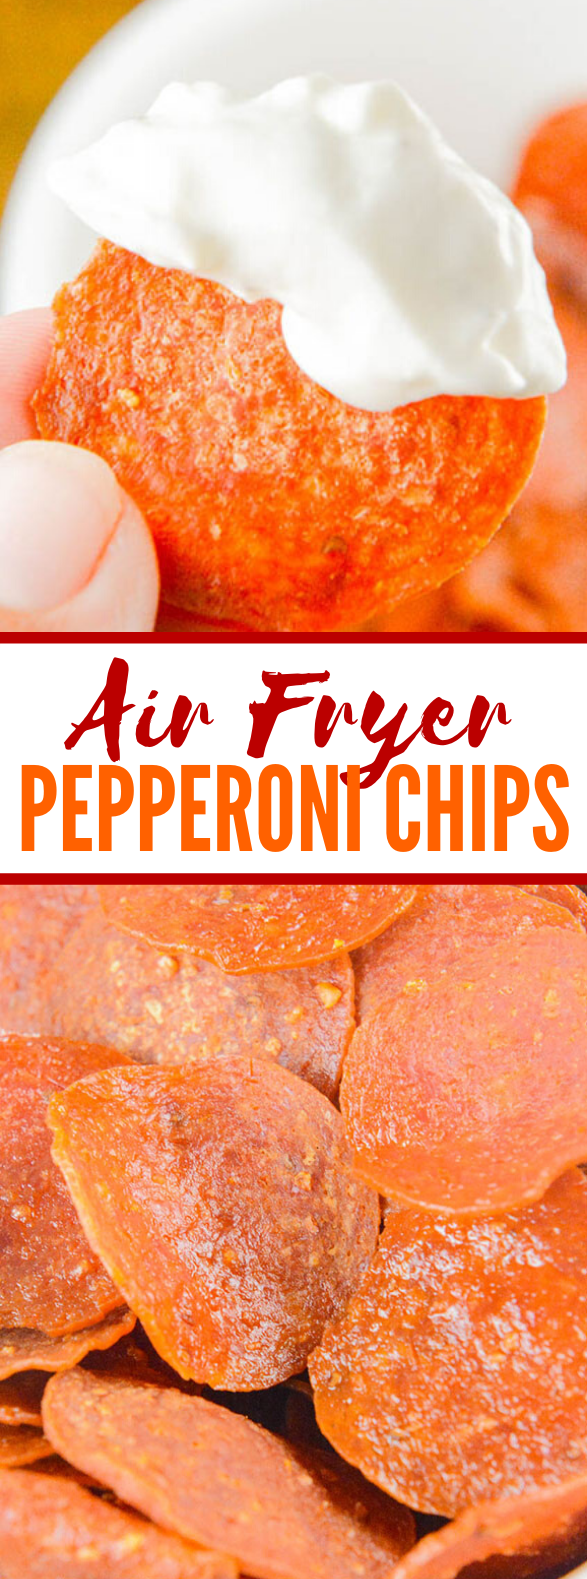 AIR FRYER PEPPERONI CHIPS (LOW CARB SNACK) #diet #appetizers